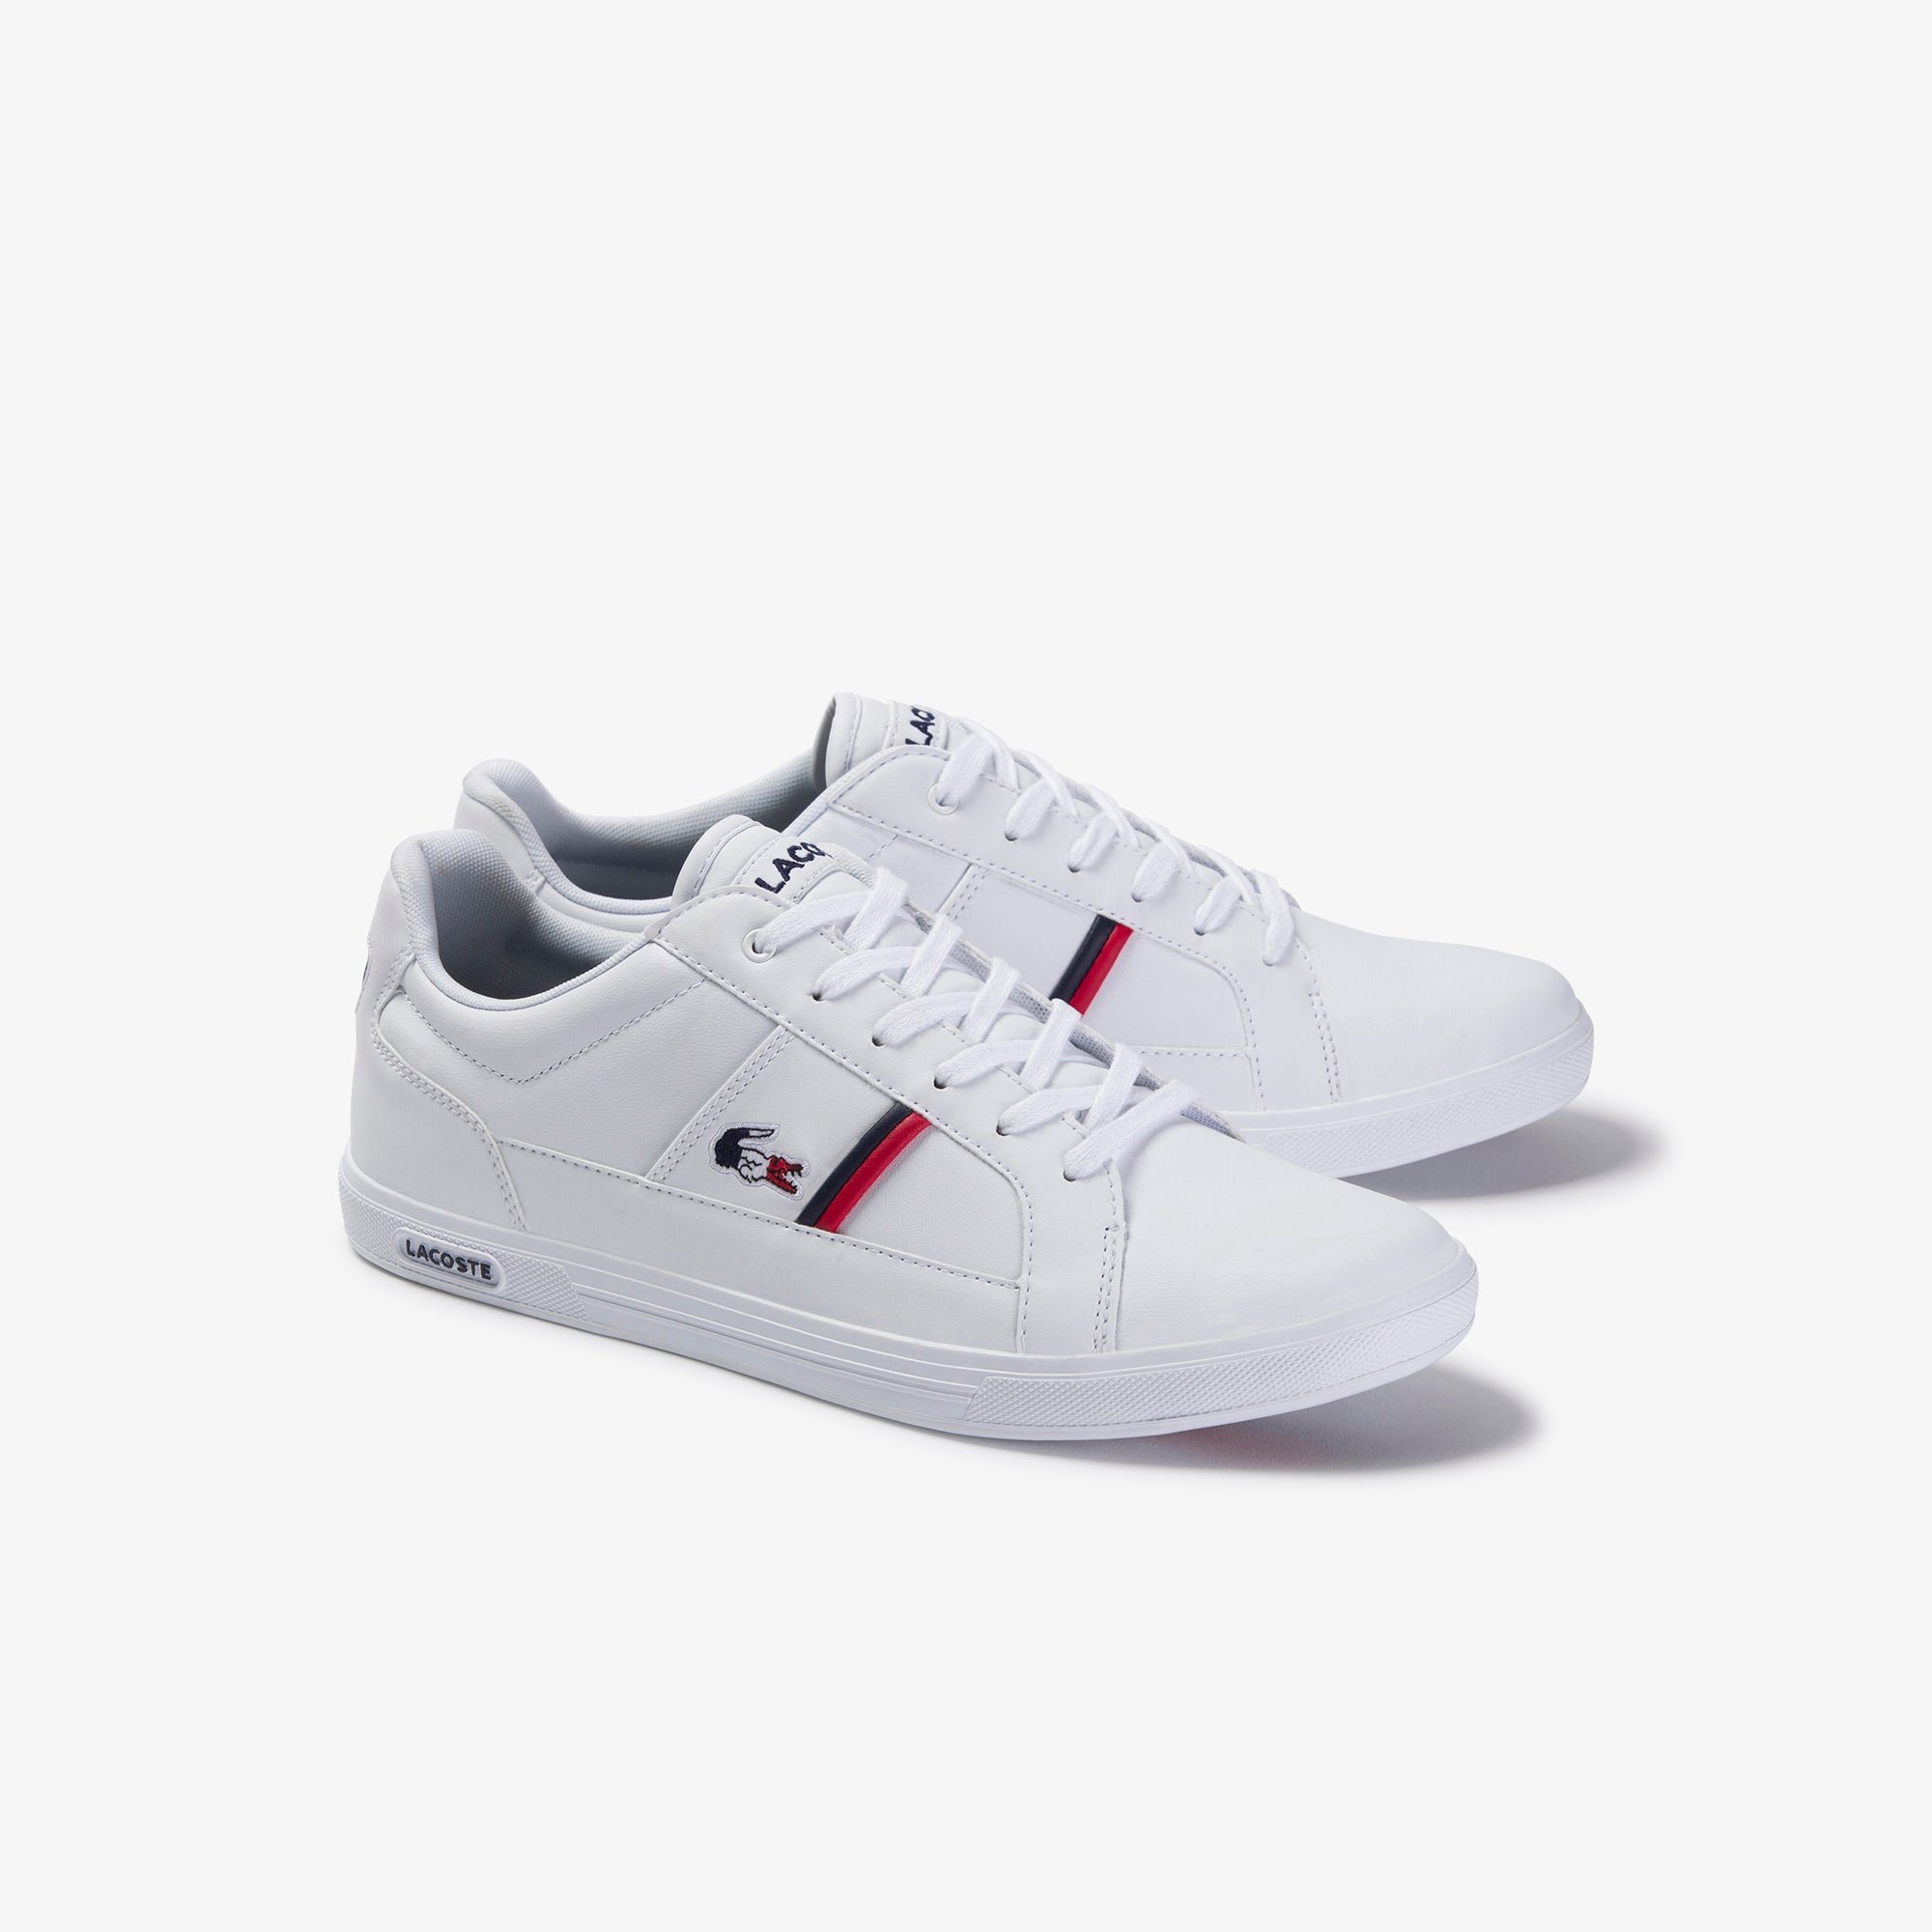 lacoste shoes afterpay